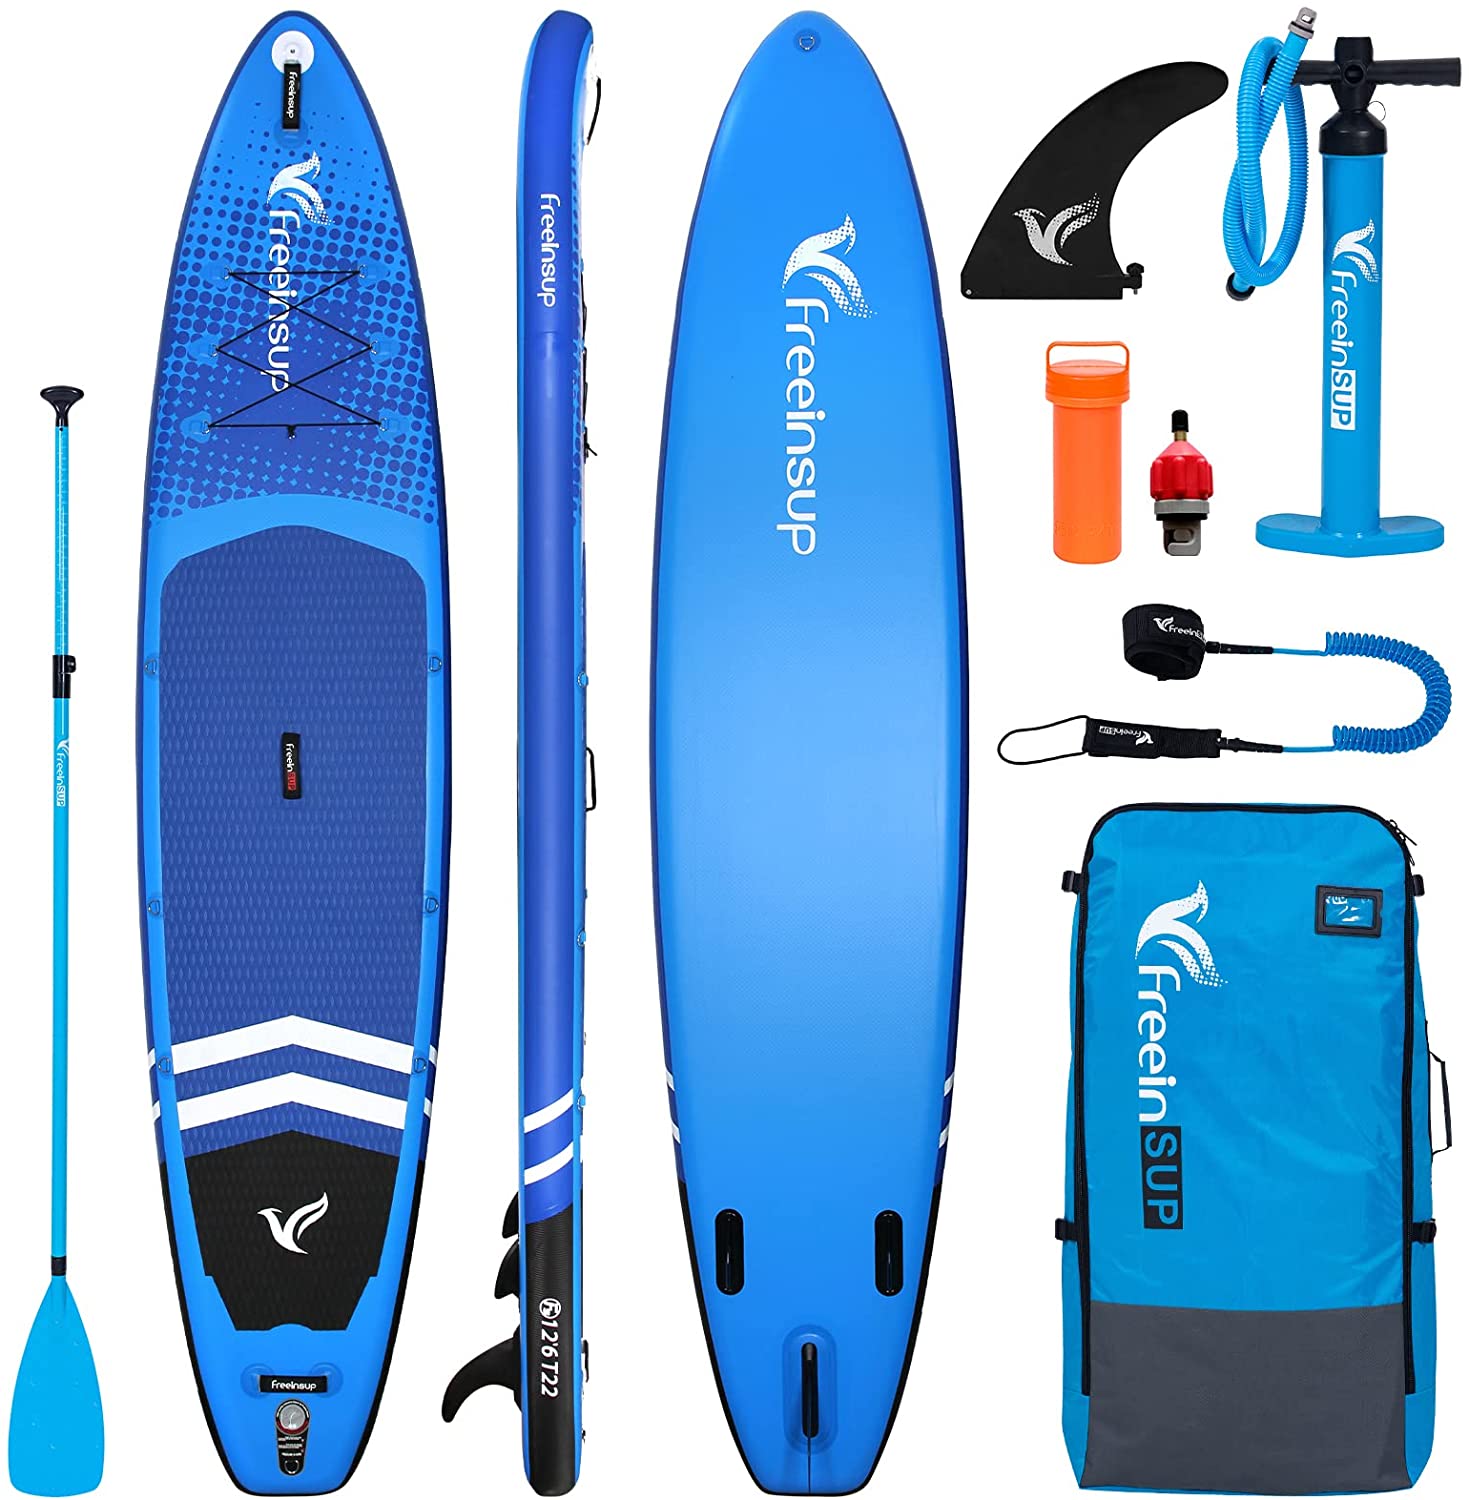 Freein 12'6" Racer Touring Inflatable SUP 2022